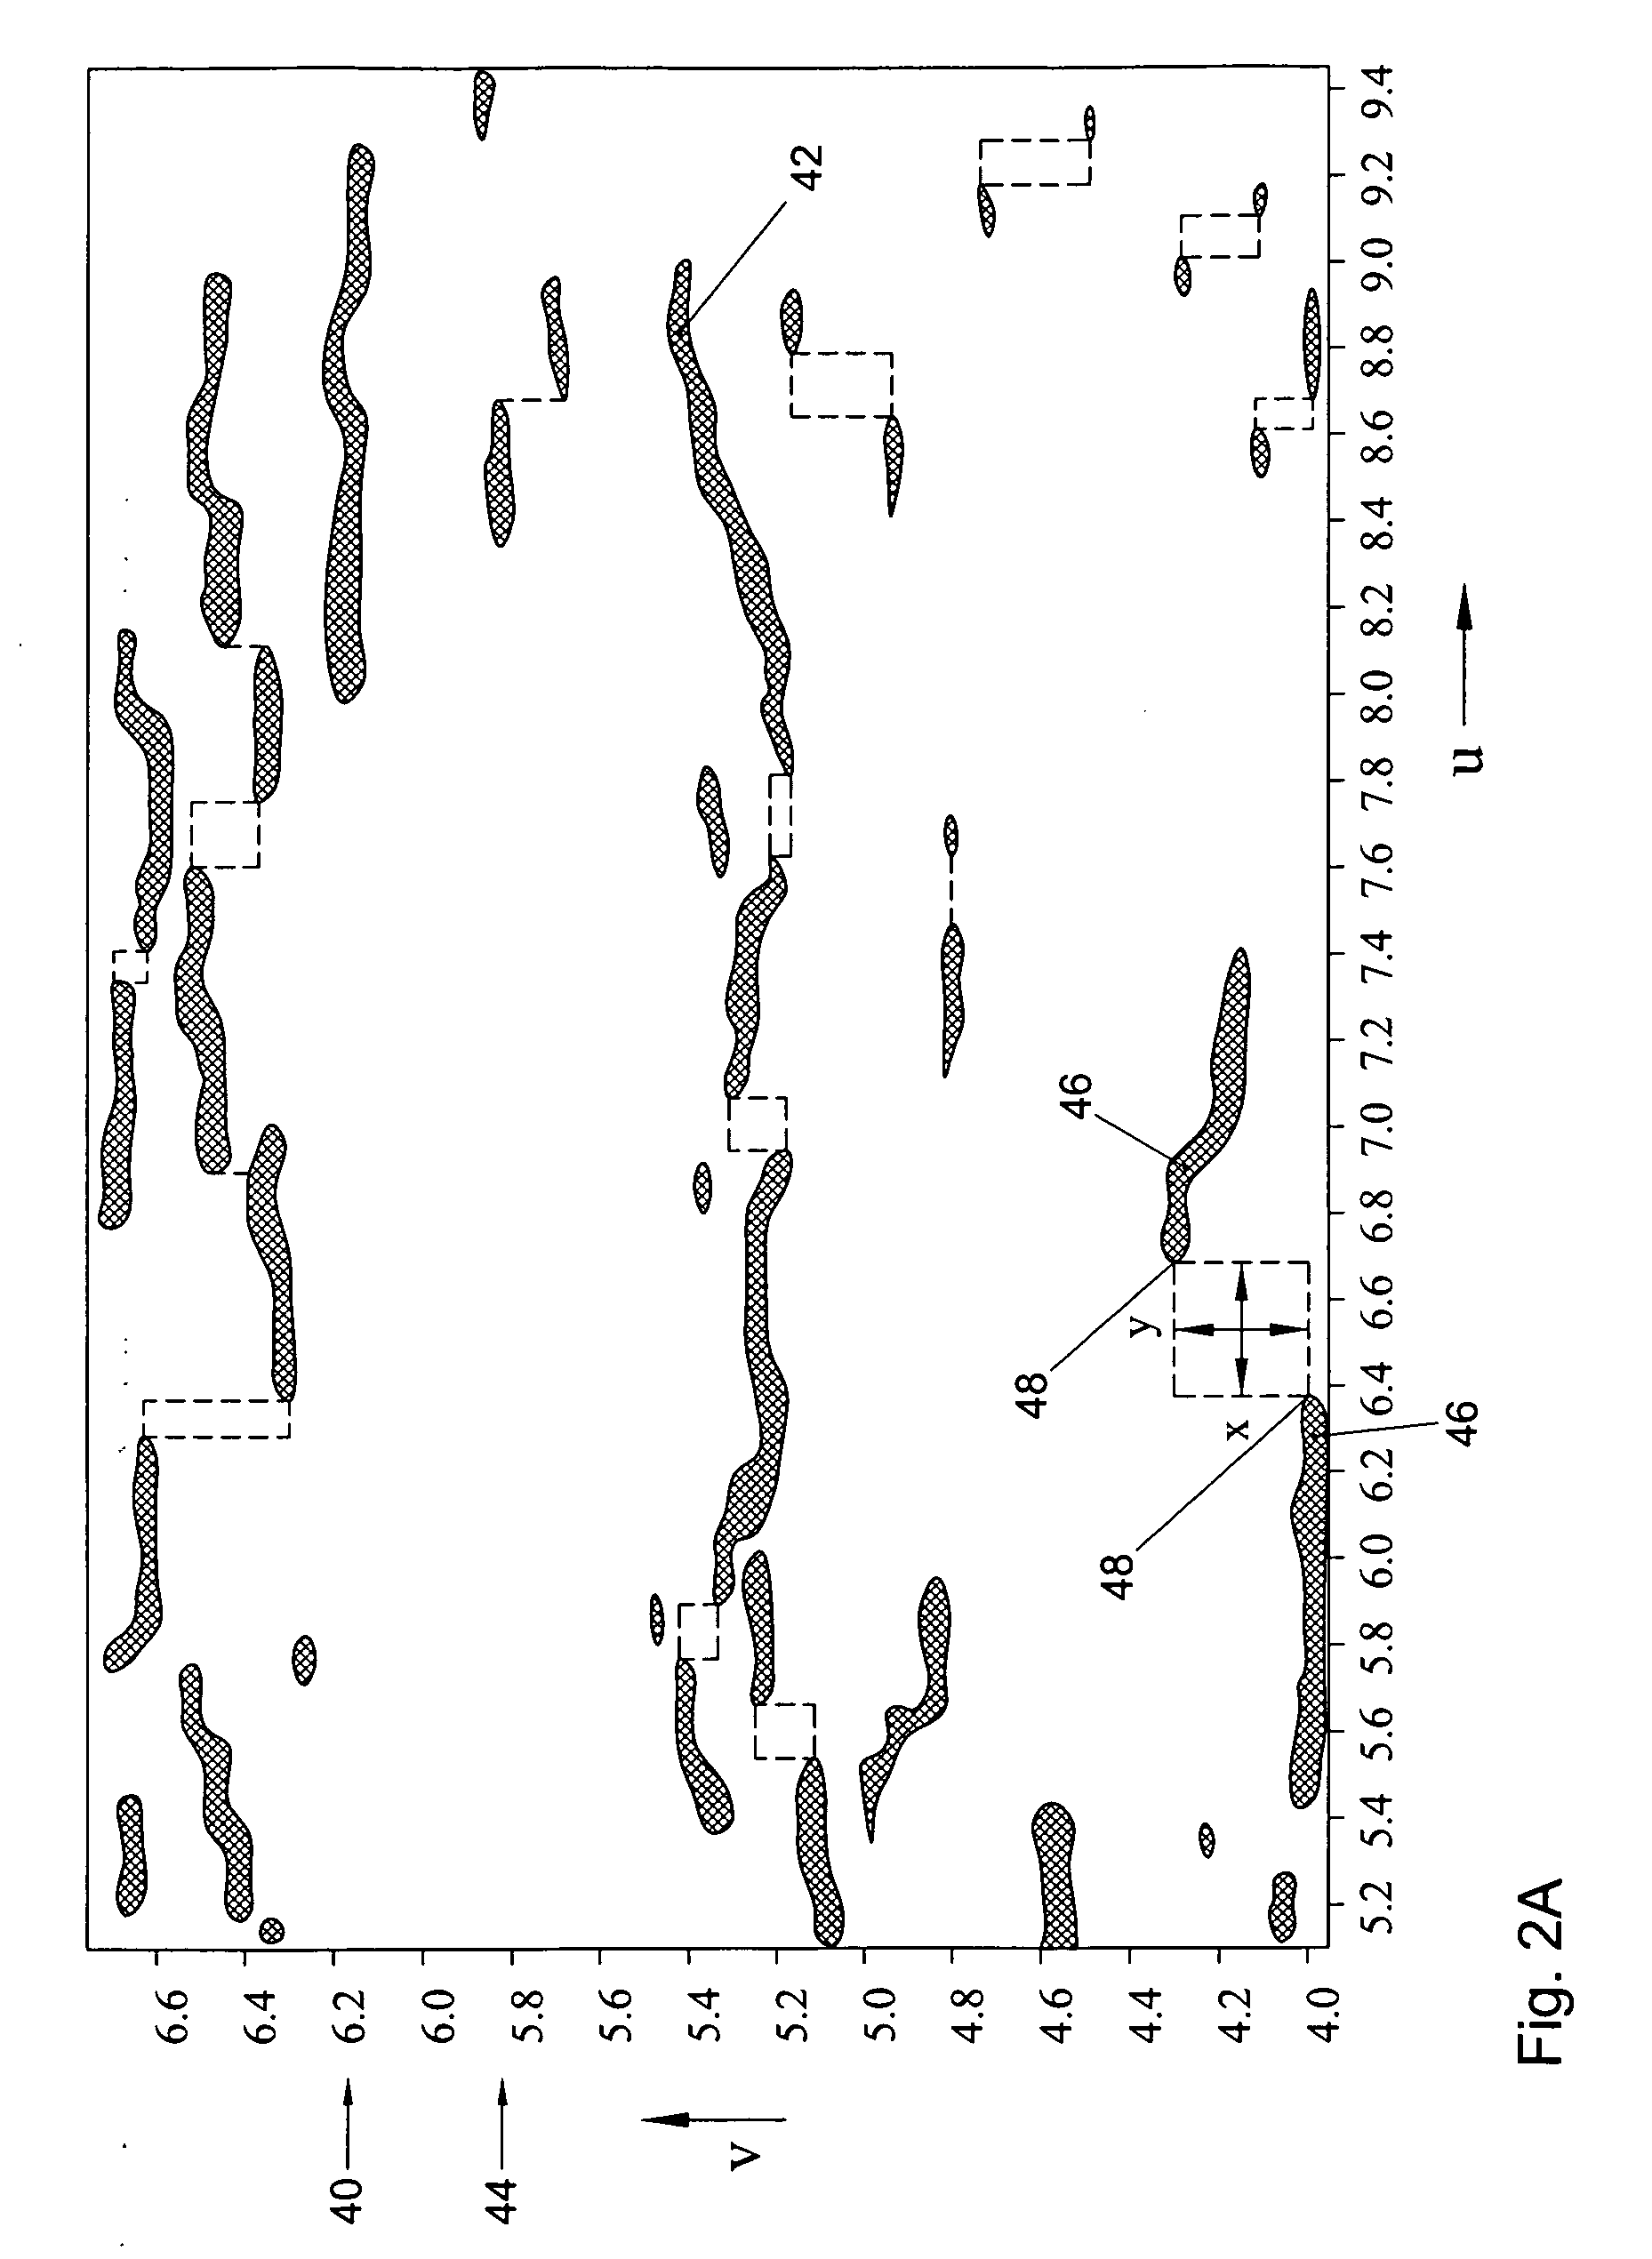 Method and system for non-destructive inspection of a colony of stress corrosion cracks